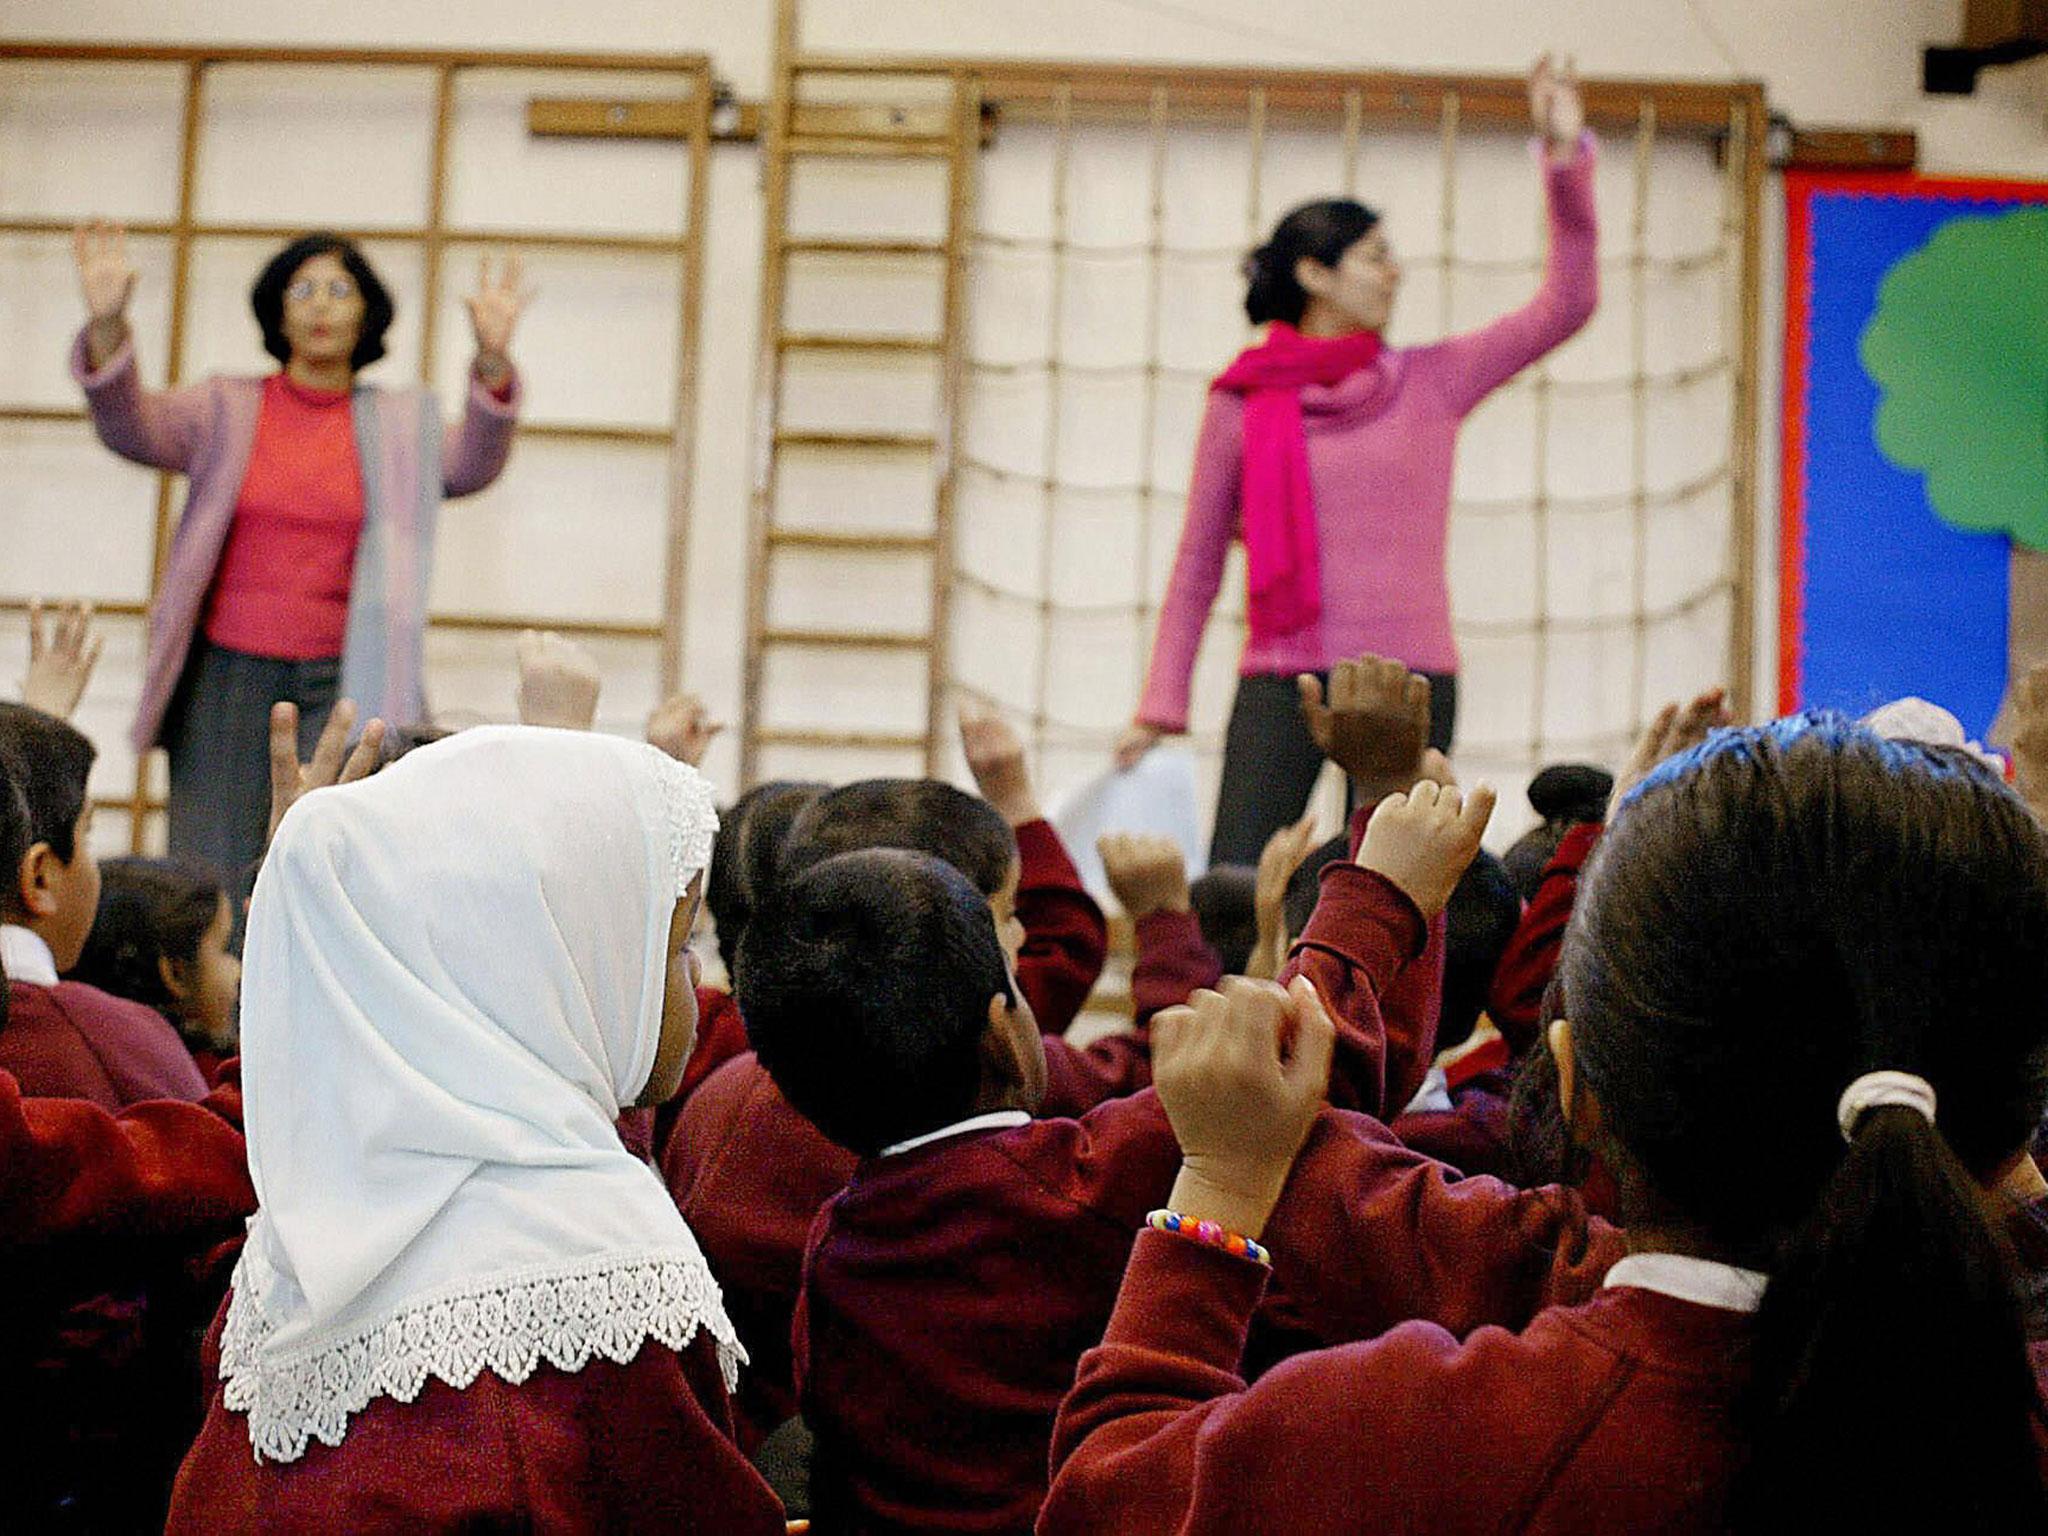 Teachers unions and anti-racism said they have recorded an increase in Islamophobic incidents in schools with Muslim pupils in British schools increasingly likely to be taunted as “terrorists”, “paedophiles” or “immigrants”